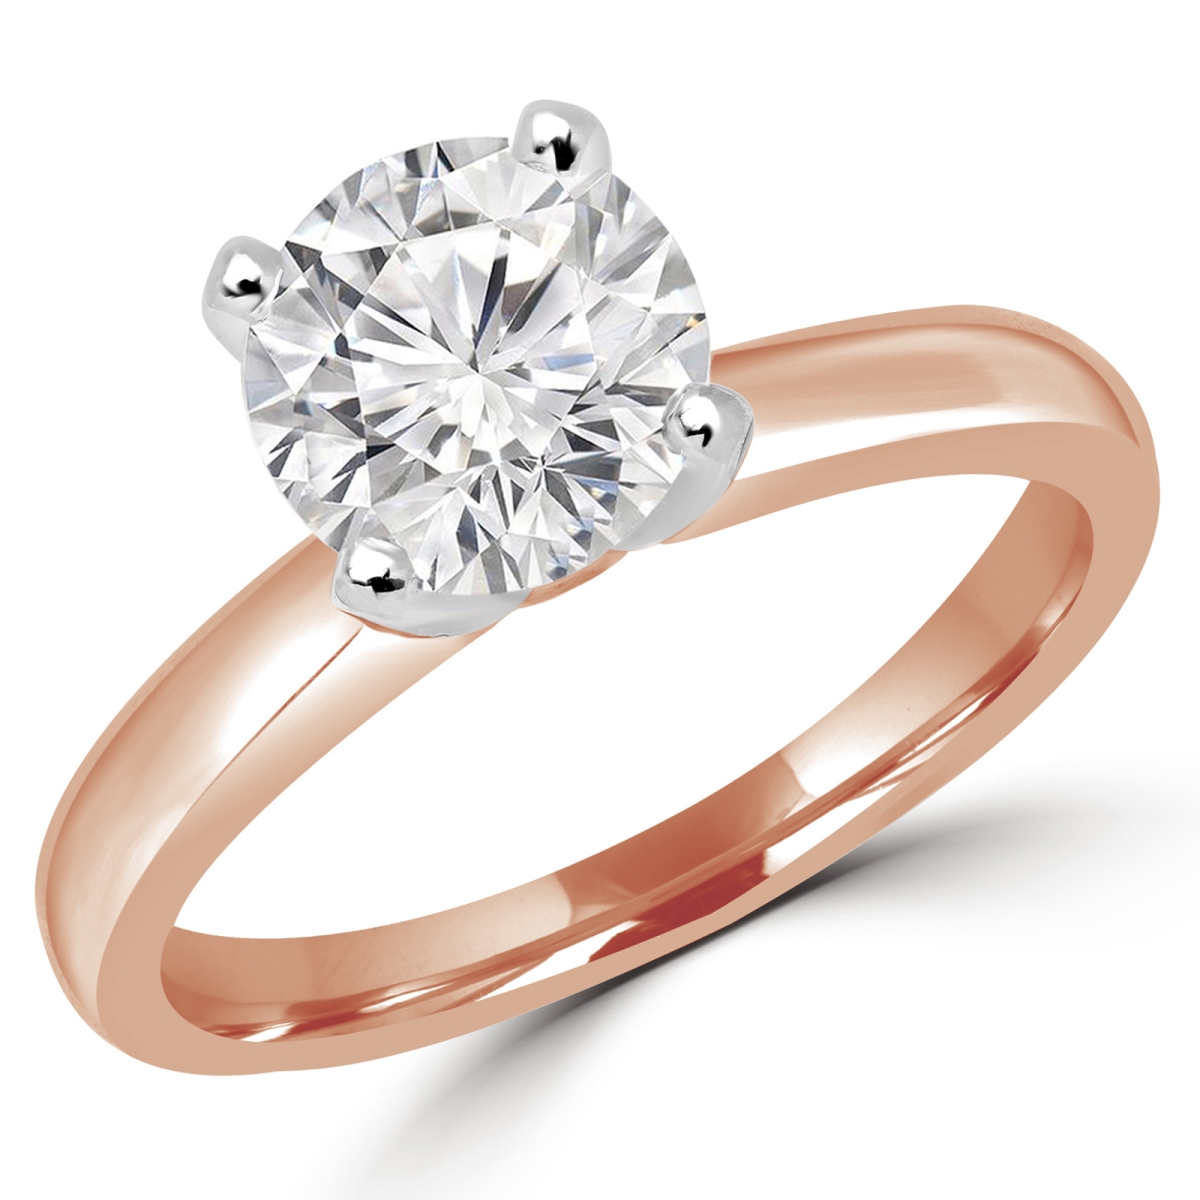 Picture of Majesty Diamonds MD180009-7 0.6 CT Round Diamond Solitaire Engagement Ring in 14K Rose Gold - Size 7